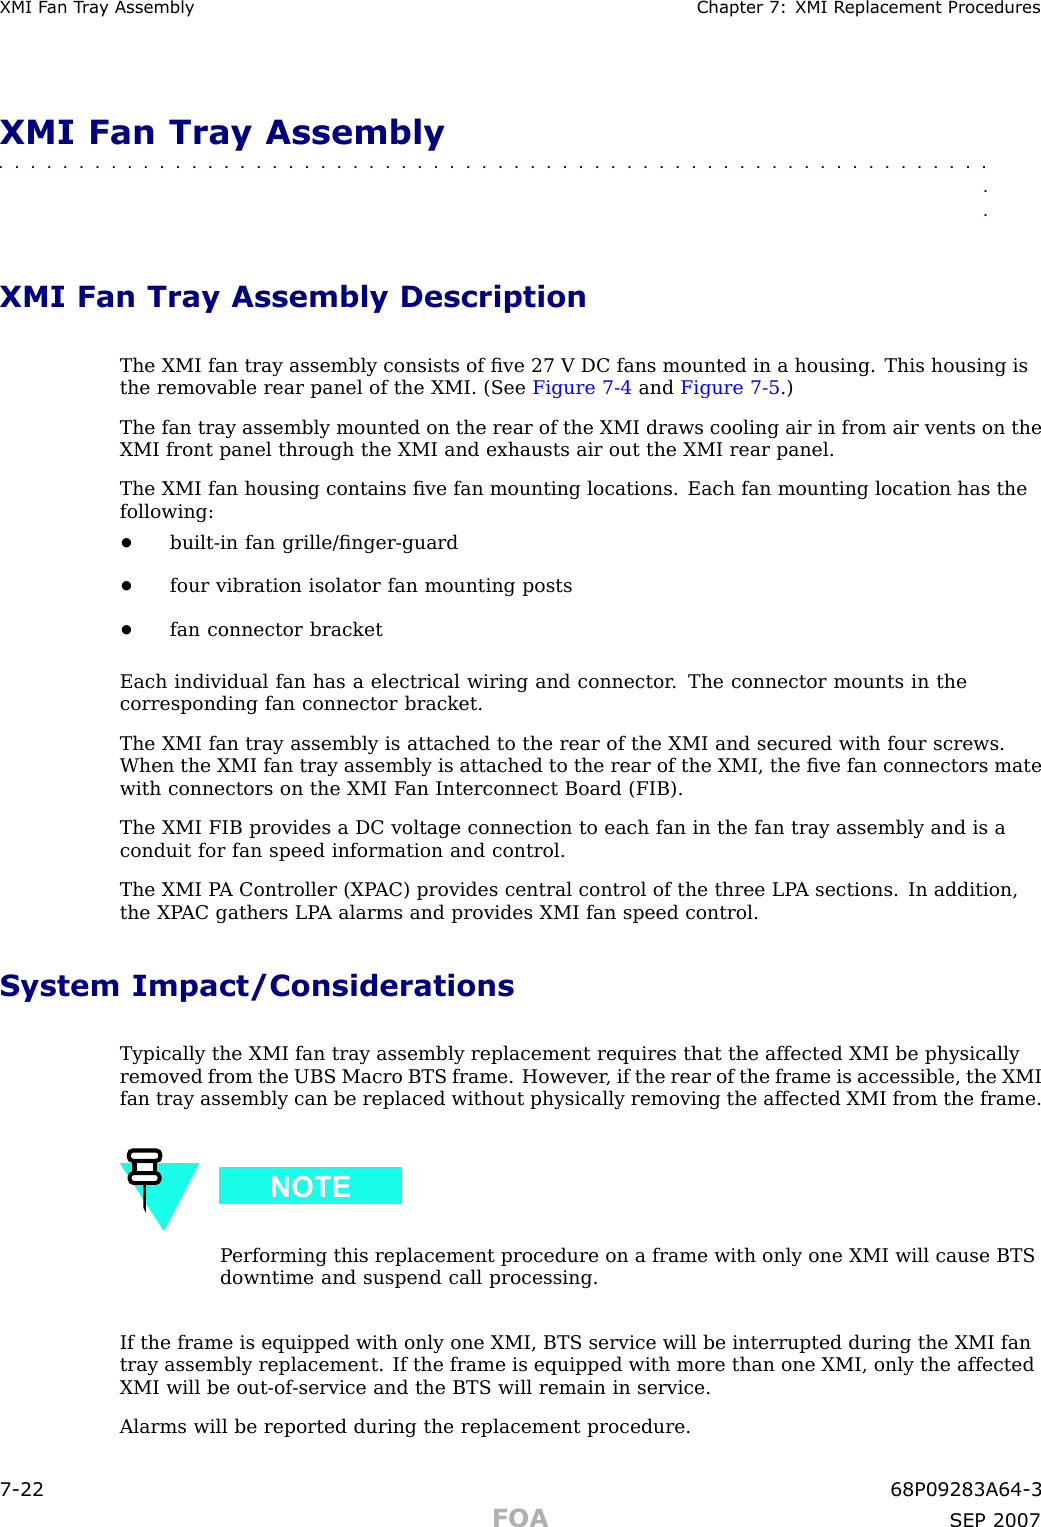 XMI F an T r a y Assembly Chapter 7: XMI R eplacement ProceduresXMI Fan Tray Assembly■■■■■■■■■■■■■■■■■■■■■■■■■■■■■■■■■■■■■■■■■■■■■■■■■■■■■■■■■■■■■■■■XMI Fan Tray Assembly DescriptionThe XMI fan tray assembly consists of ﬁve 27 V DC fans mounted in a housing. This housing isthe removable rear panel of the XMI. (See Figure 7 -4 and Figure 7 -5 .)The fan tray assembly mounted on the rear of the XMI draws cooling air in from air vents on theXMI front panel through the XMI and exhausts air out the XMI rear panel.The XMI fan housing contains ﬁve fan mounting locations. Each fan mounting location has thefollowing:•built -in fan grille/ﬁnger -guard•four vibration isolator fan mounting posts•fan connector bracketEach individual fan has a electrical wiring and connector . The connector mounts in thecorresponding fan connector bracket.The XMI fan tray assembly is attached to the rear of the XMI and secured with four screws.When the XMI fan tray assembly is attached to the rear of the XMI, the ﬁve fan connectors matewith connectors on the XMI F an Interconnect Board (FIB).The XMI FIB provides a DC voltage connection to each fan in the fan tray assembly and is aconduit for fan speed information and control.The XMI P A Controller (XP AC) provides central control of the three LP A sections. In addition,the XP AC gathers LP A alarms and provides XMI fan speed control.System Impact/ConsiderationsTypically the XMI fan tray assembly replacement requires that the affected XMI be physicallyremoved from the UBS Macro BTS frame. However , if the rear of the frame is accessible, the XMIfan tray assembly can be replaced without physically removing the affected XMI from the frame.P erforming this replacement procedure on a frame with only one XMI will cause BTSdowntime and suspend call processing.If the frame is equipped with only one XMI, BTS service will be interrupted during the XMI fantray assembly replacement. If the frame is equipped with more than one XMI, only the affectedXMI will be out -of -service and the BTS will remain in service.Alarms will be reported during the replacement procedure.7 -22 68P09283A64 -3FOA SEP 2007